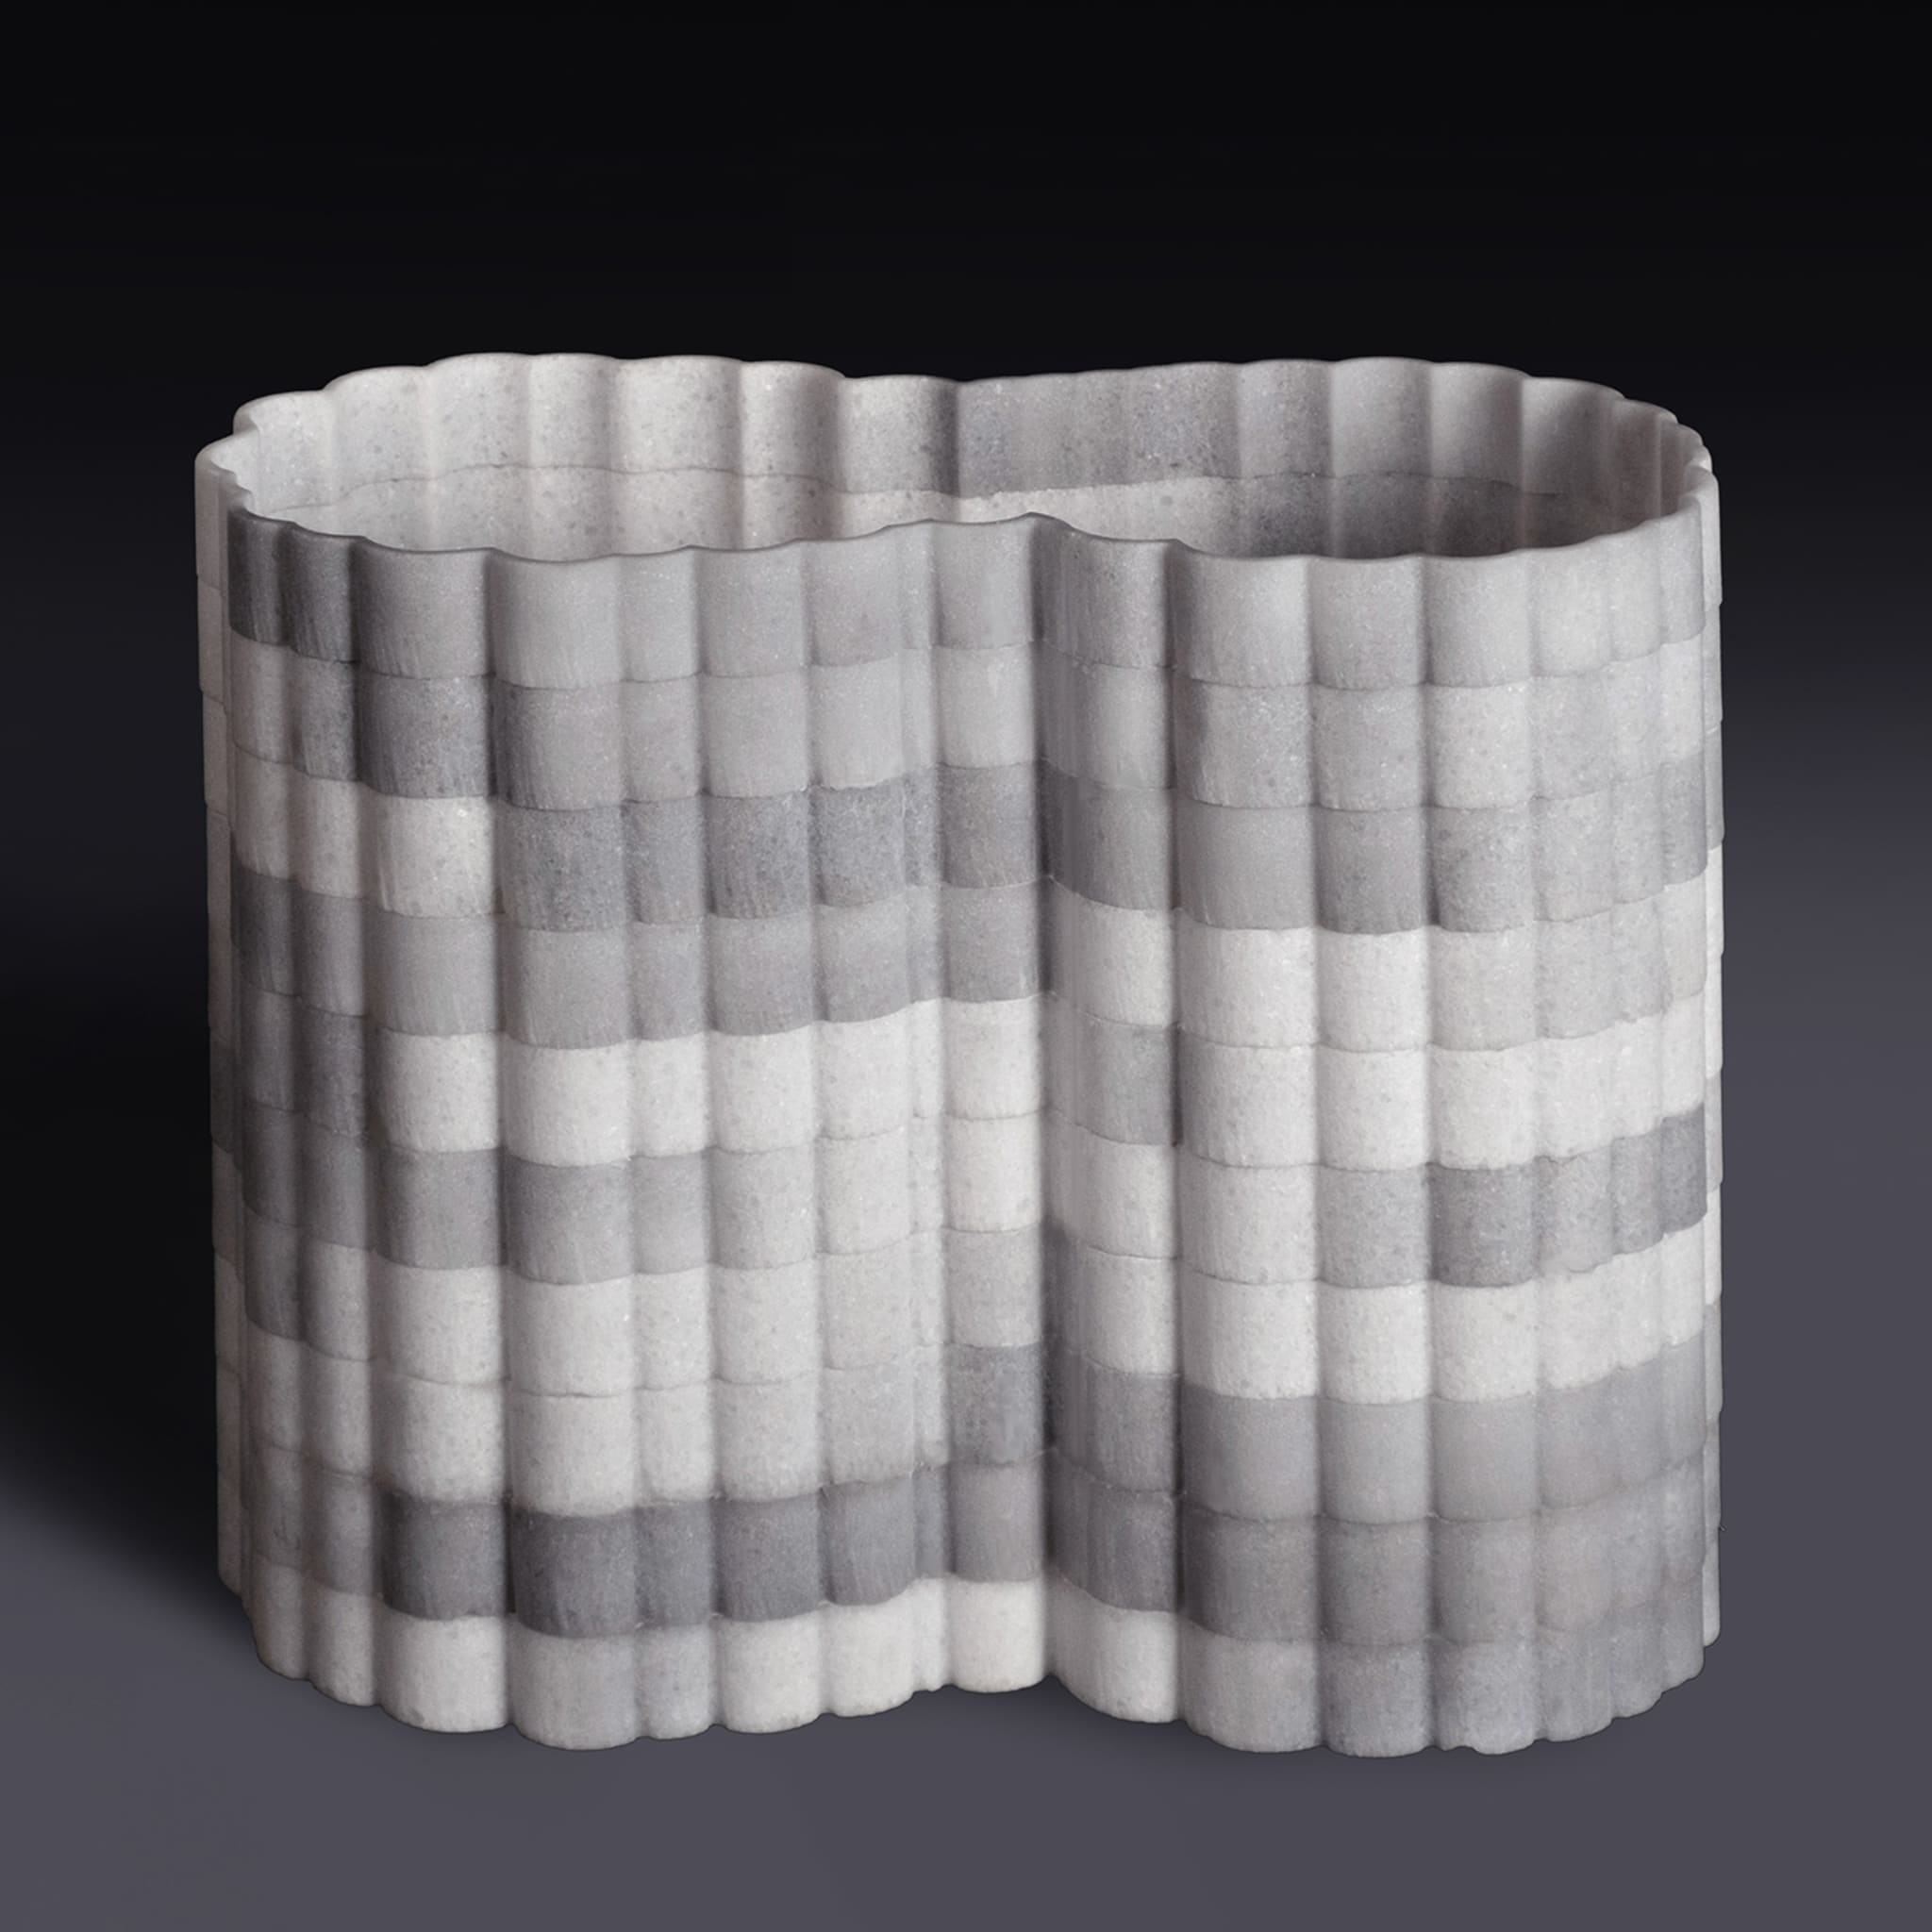 Stripes Vase Olimpic White Marble #2 by Paolo Ulian - Alternative view 3